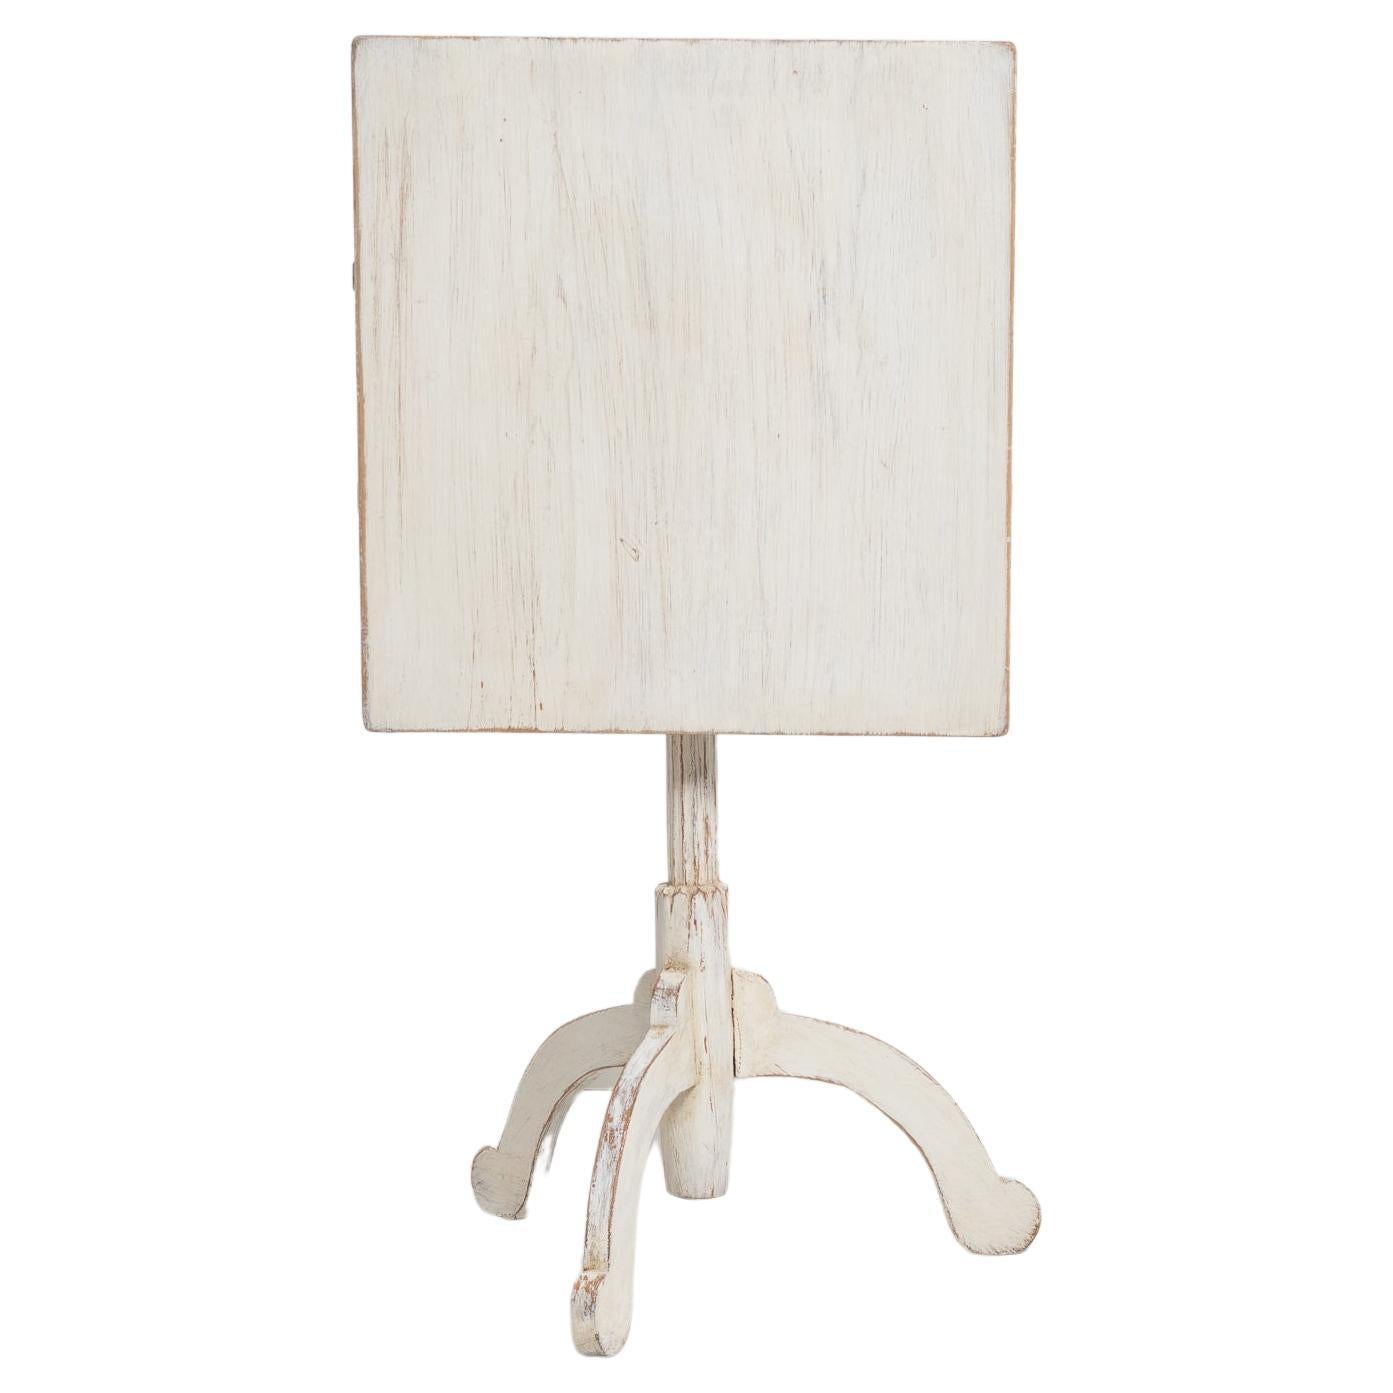 Small Swedish Antique White Rustic Country Tilt Top Column Table For Sale